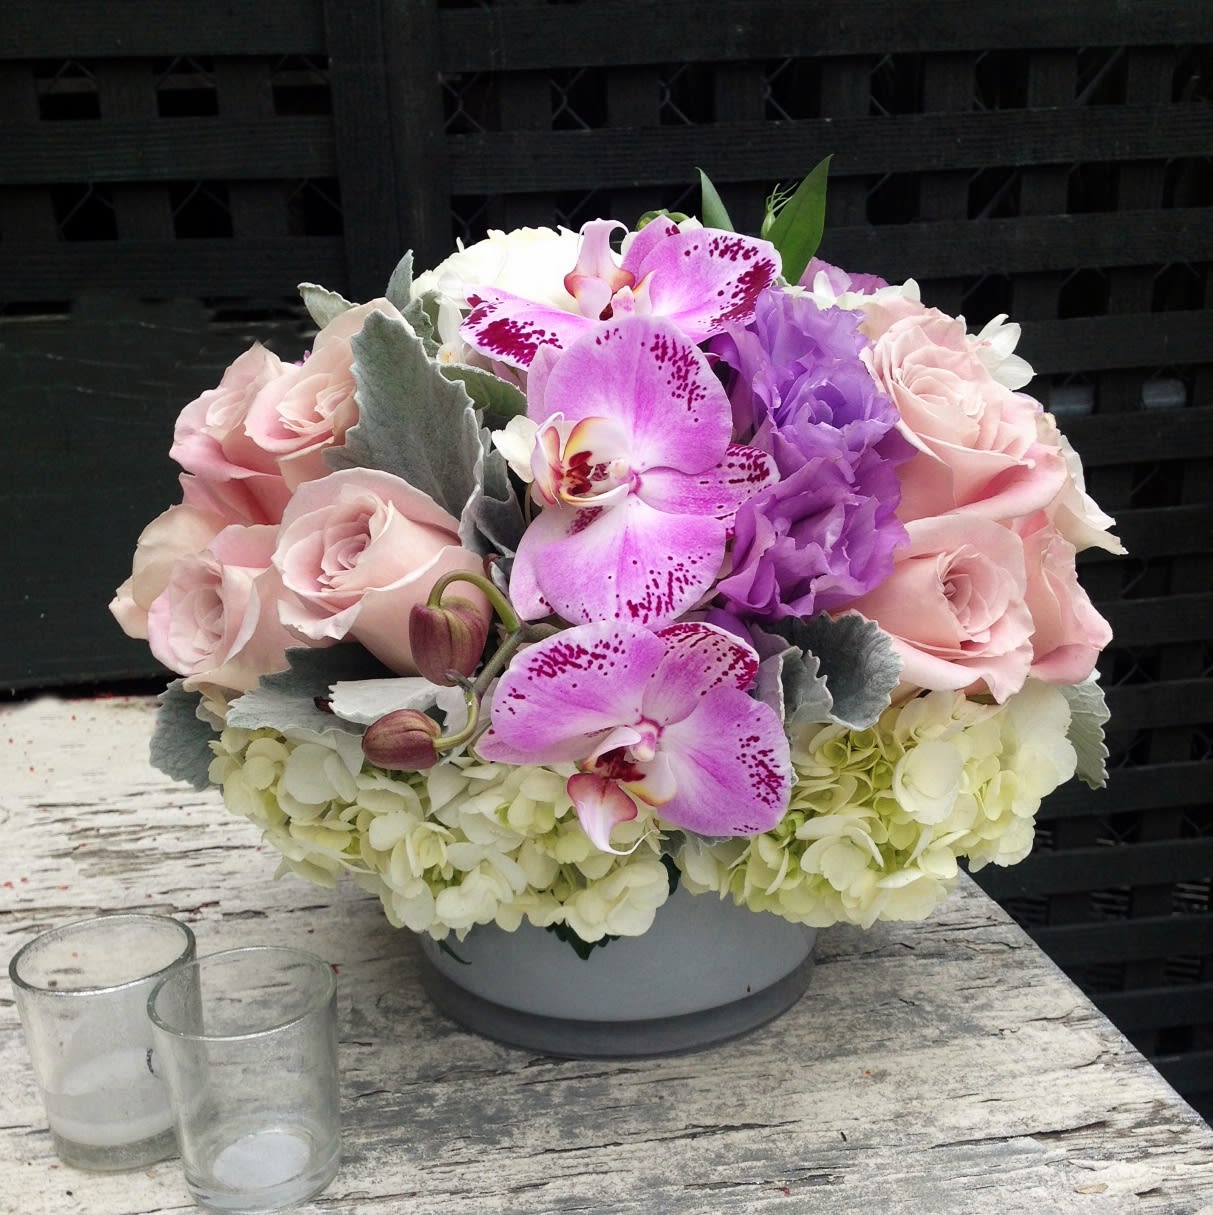 Bashful Beauty - This feminine bouquet is awash in lovely pastel colors that bring harmony and peace. Featuring peonies, orchids, roses, hydrangea and narcissus, the elegant design is wonderful for all occasions. Approx. 12&quot; round.